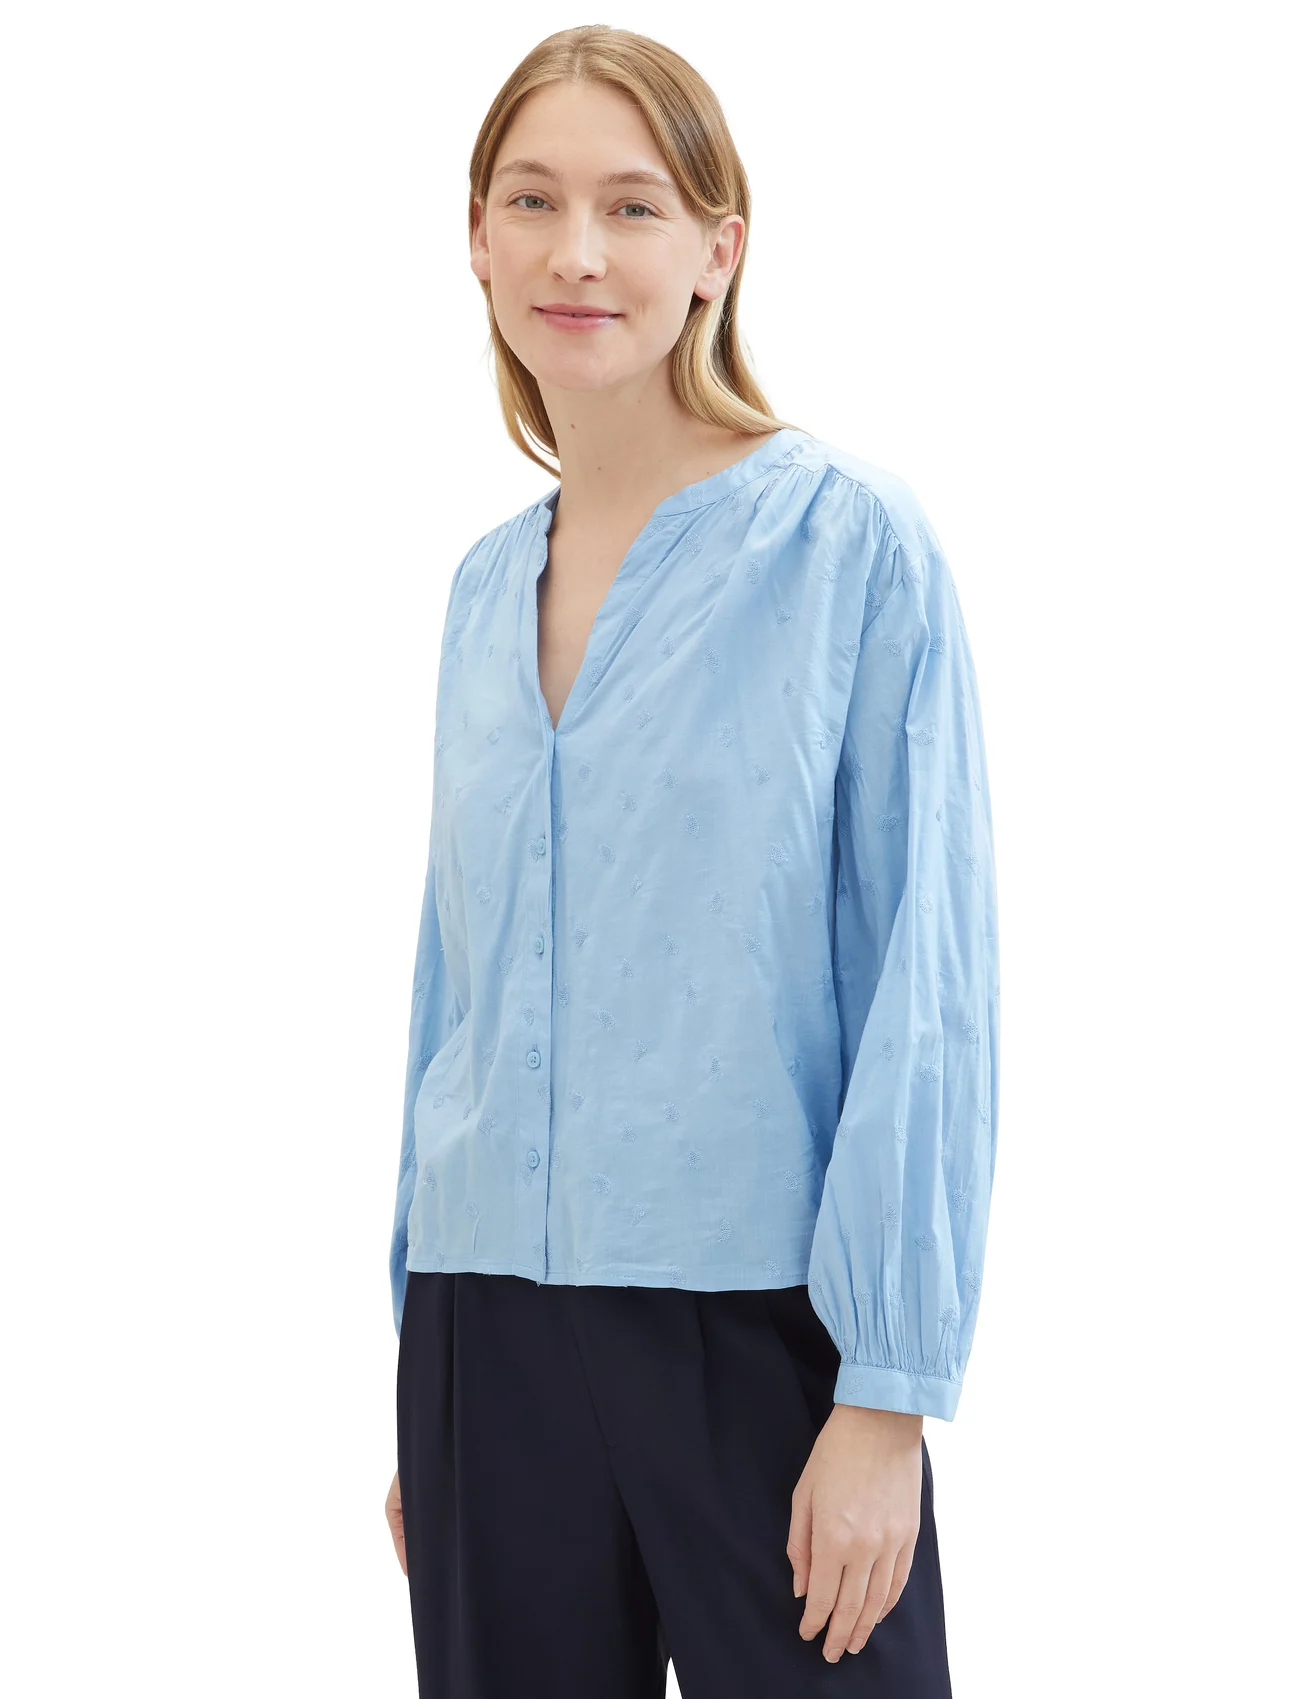 Tom Tailor - embroidered blouse - langärmlige blusen - blue tonal embroidery - 1